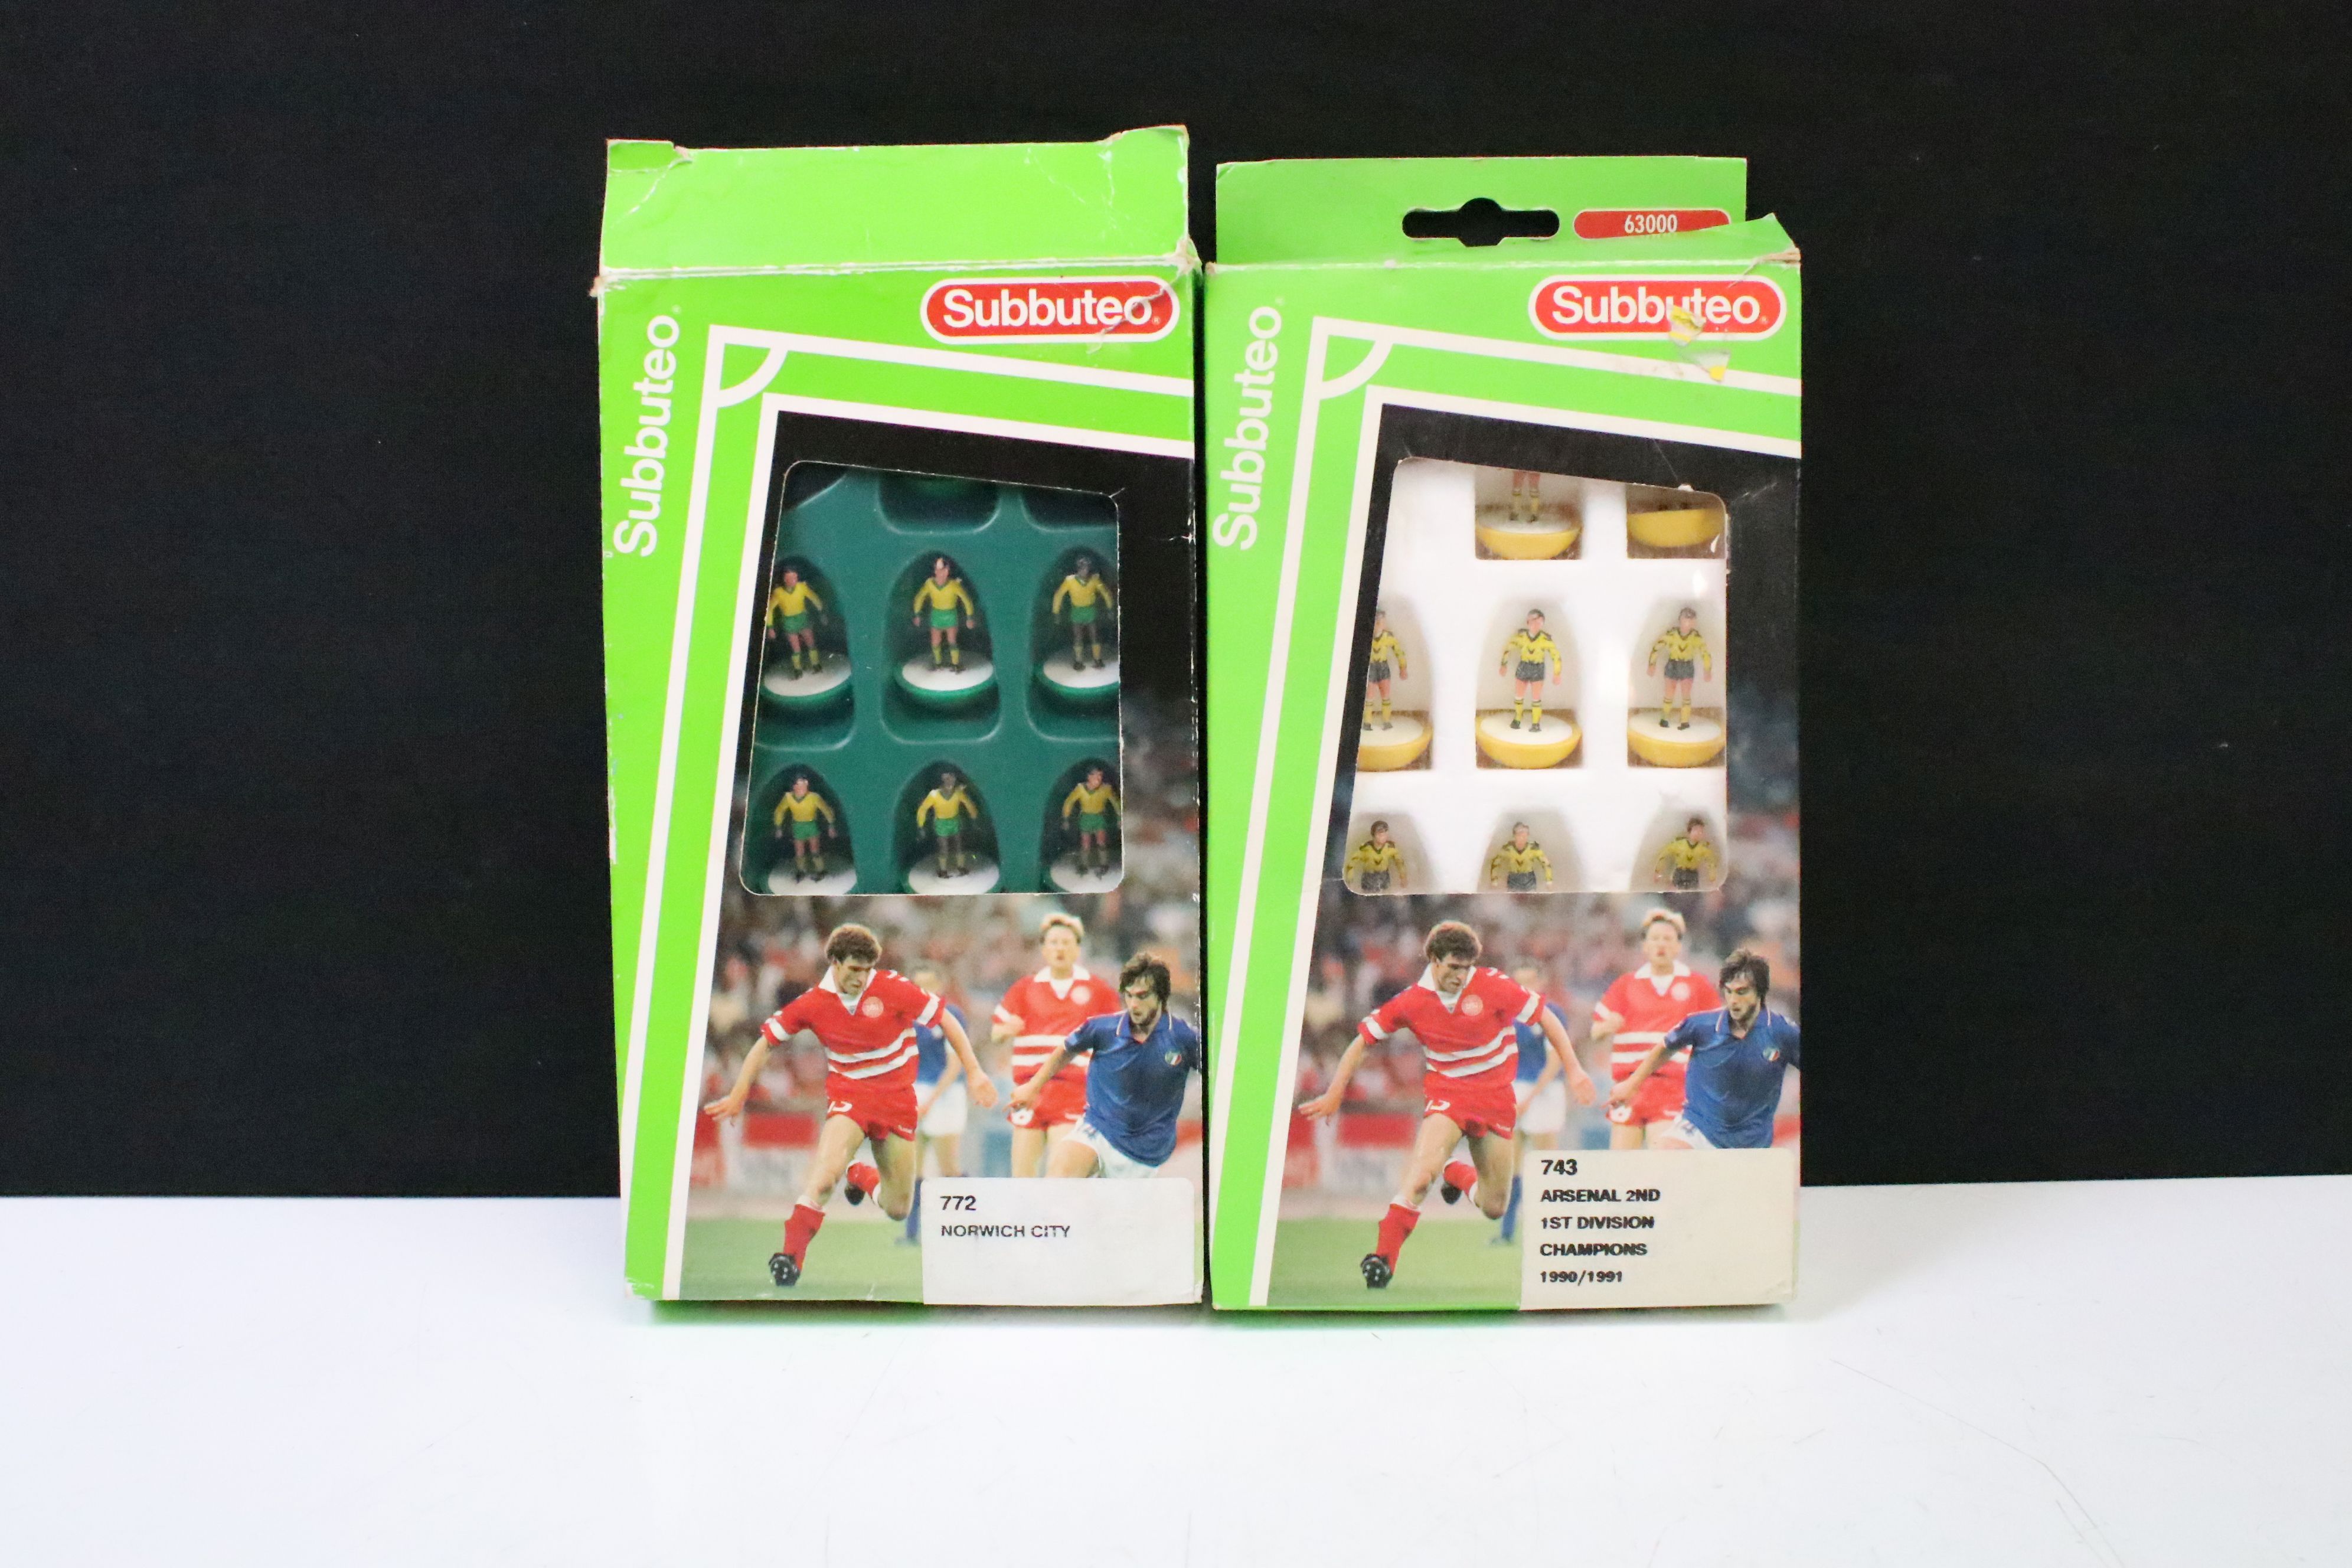 Subbuteo - Five boxed LW teams to include Brazil, England, Norwich City, Arsenal 2nd, Arsenal and - Image 7 of 10